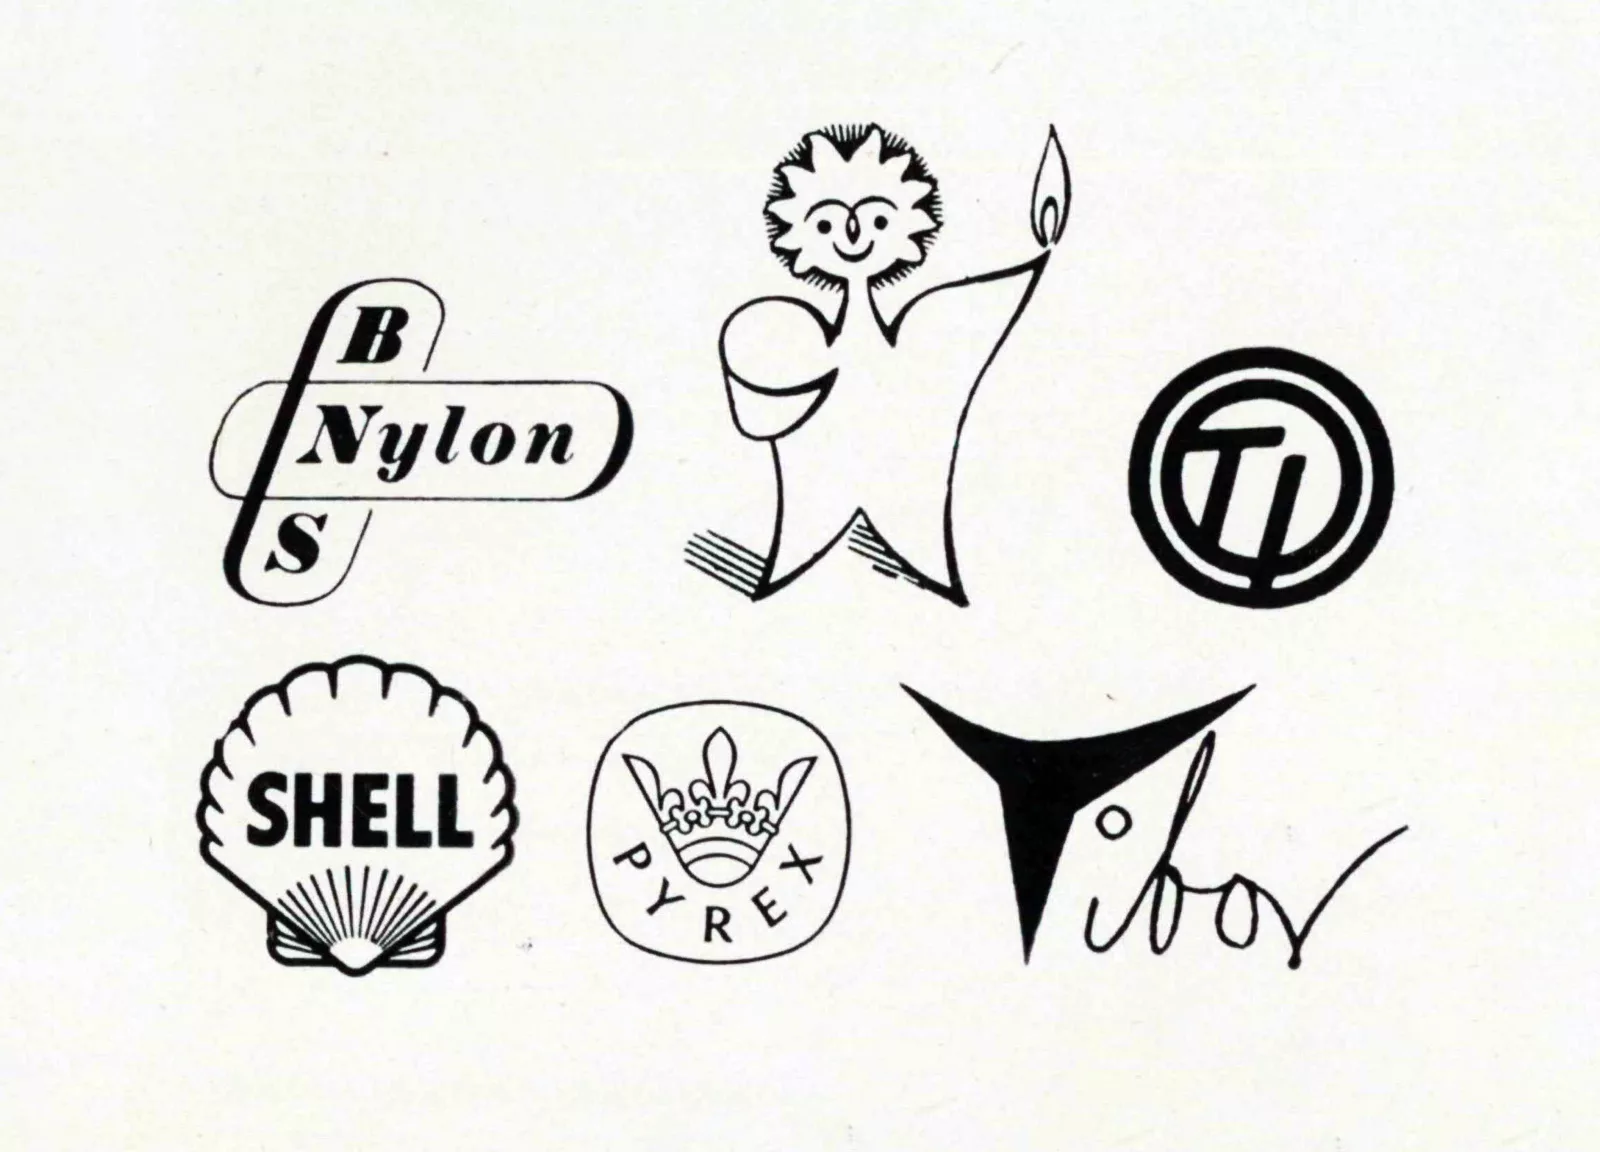 Symbols - not a house style in themselves, but important ingredients. BNS (British Nylon Spinners Ltd); DESIGNER: C. D. Notley (Advertising) Ltd; Mr Therm (The Gas Council), DESIGNER: Eric Fraser; TI (Tube Investments Ltd); Shell (Shell Petroleum Co Ltd); 'Pyrex' (James A. Jobling & Co Ltd), DESIGNER: Milner Gray; Tibor (Tibor Ltd), DESIGNER: Tibor Reich.